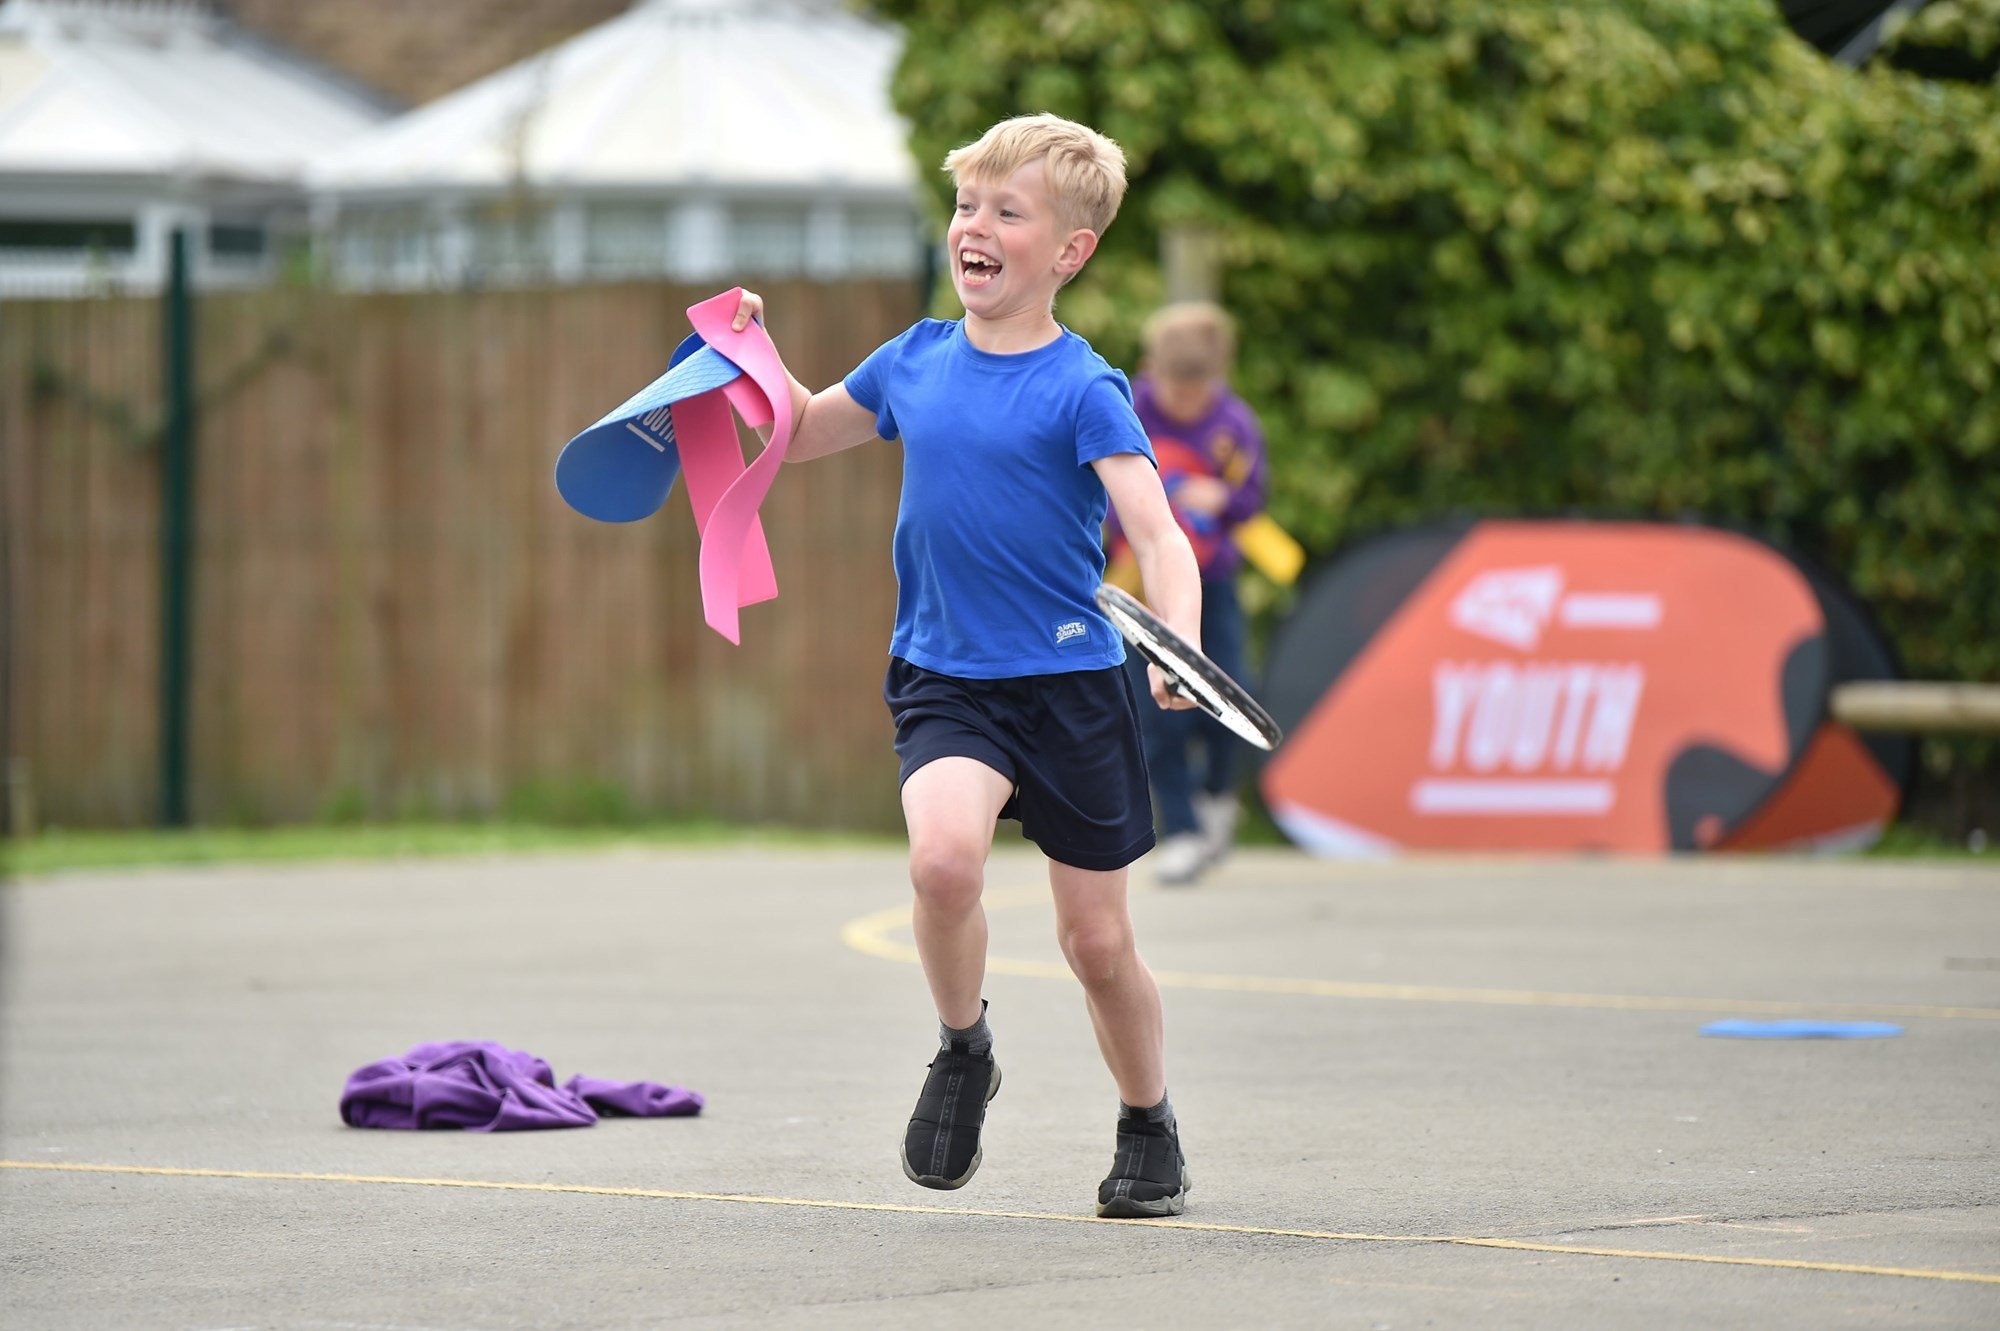 A student from St Bernadette's Primary School, Middlesbrough running during an LTA Youth coaching session